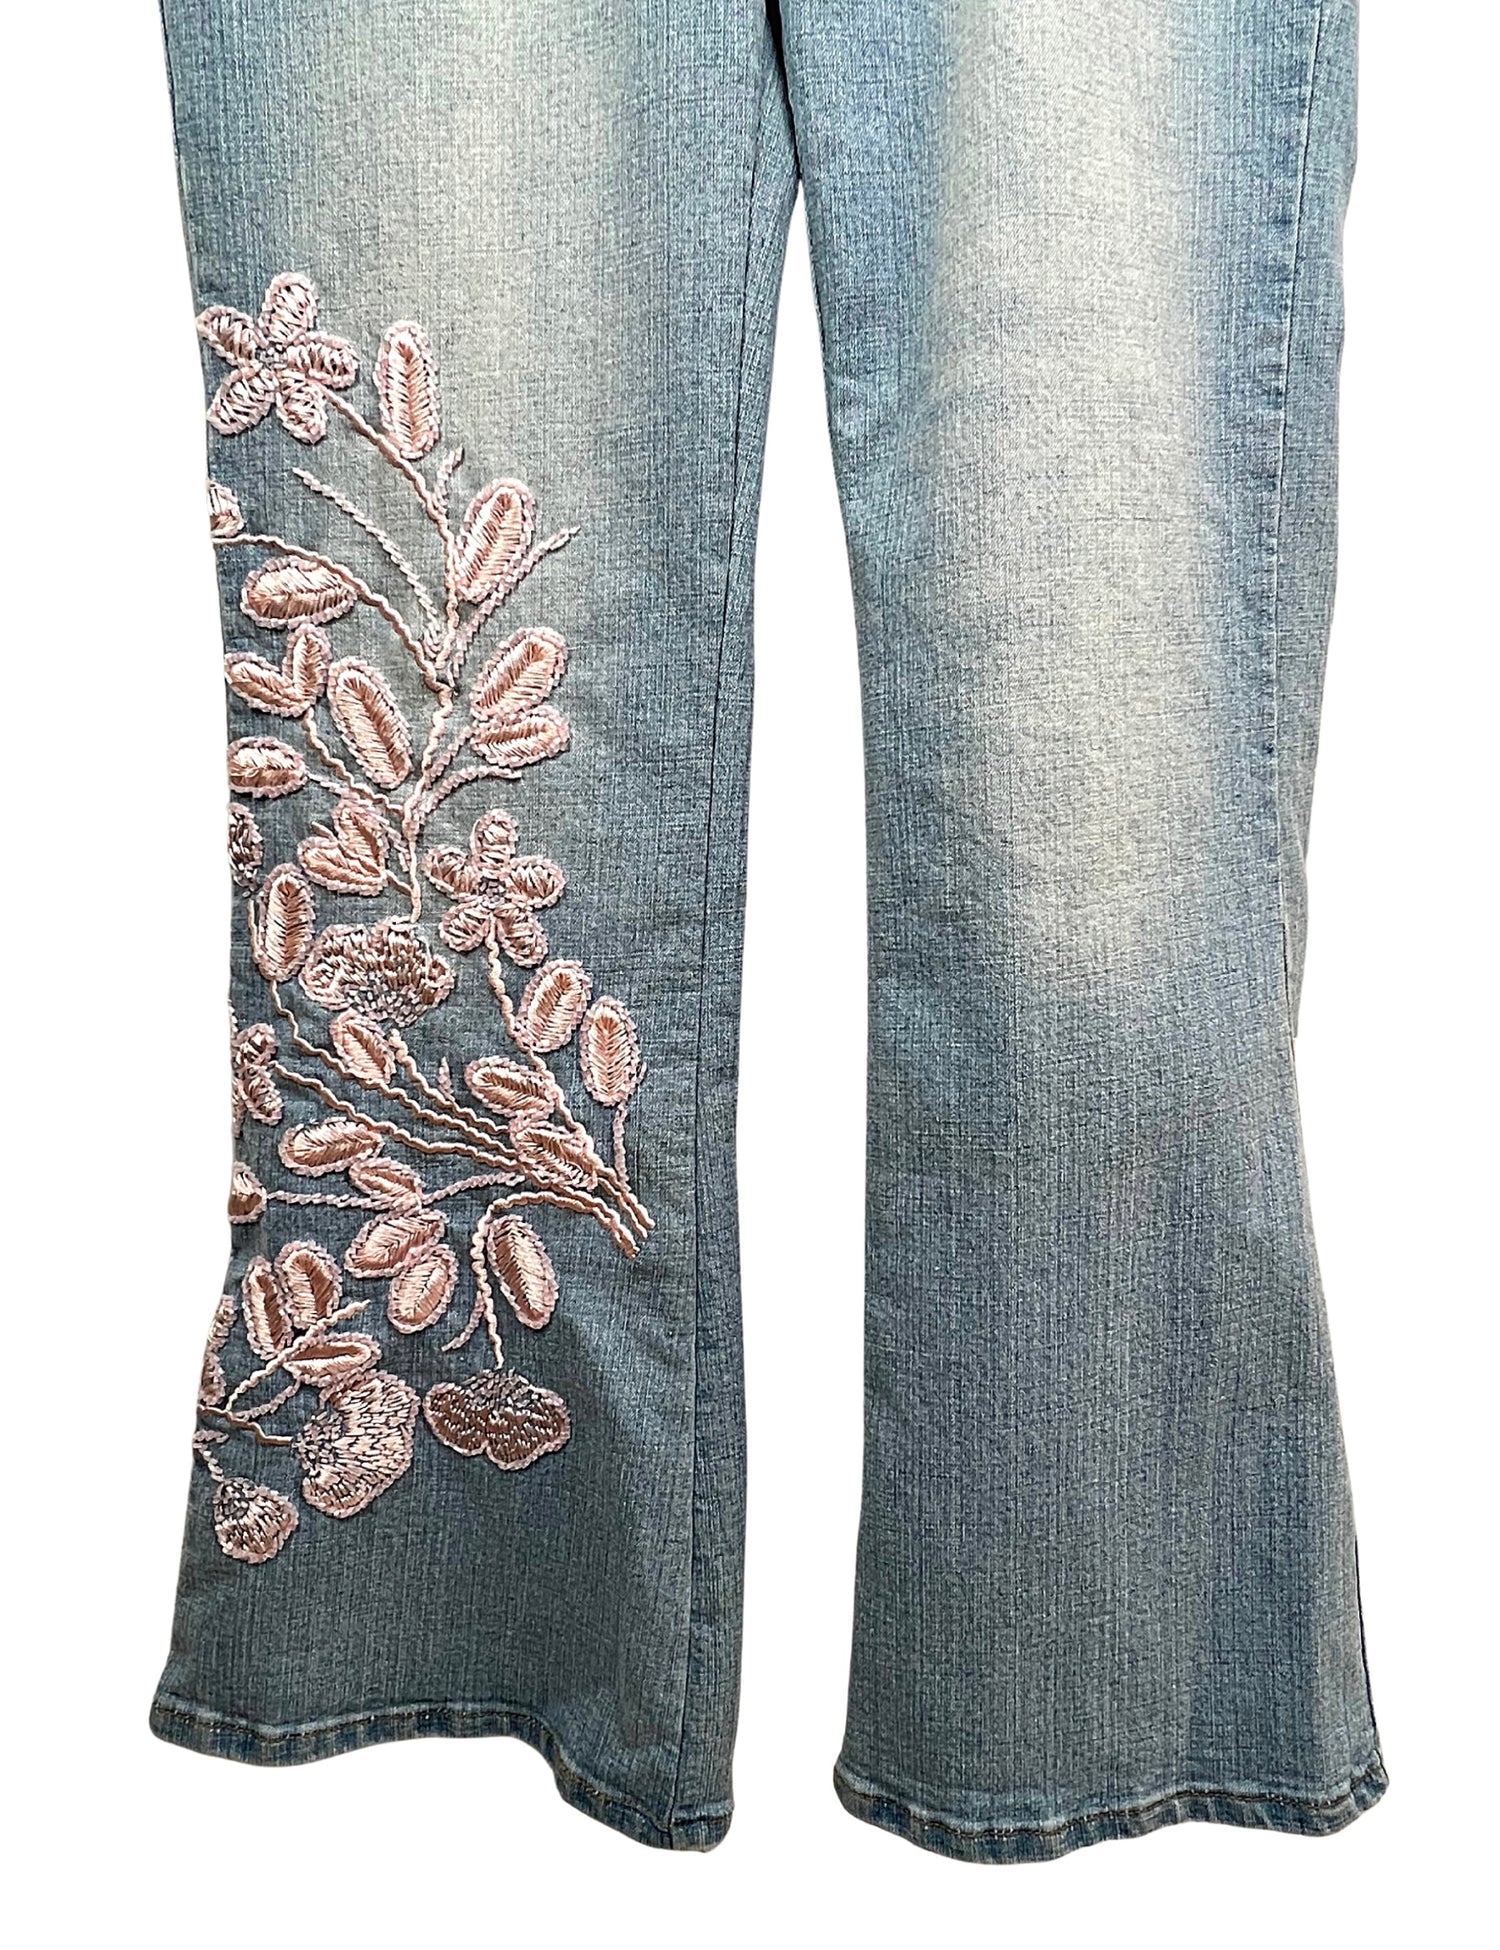 00's Y2K Vanilla Star Pink Embroidery Floral Flare Low Rise Jeans 